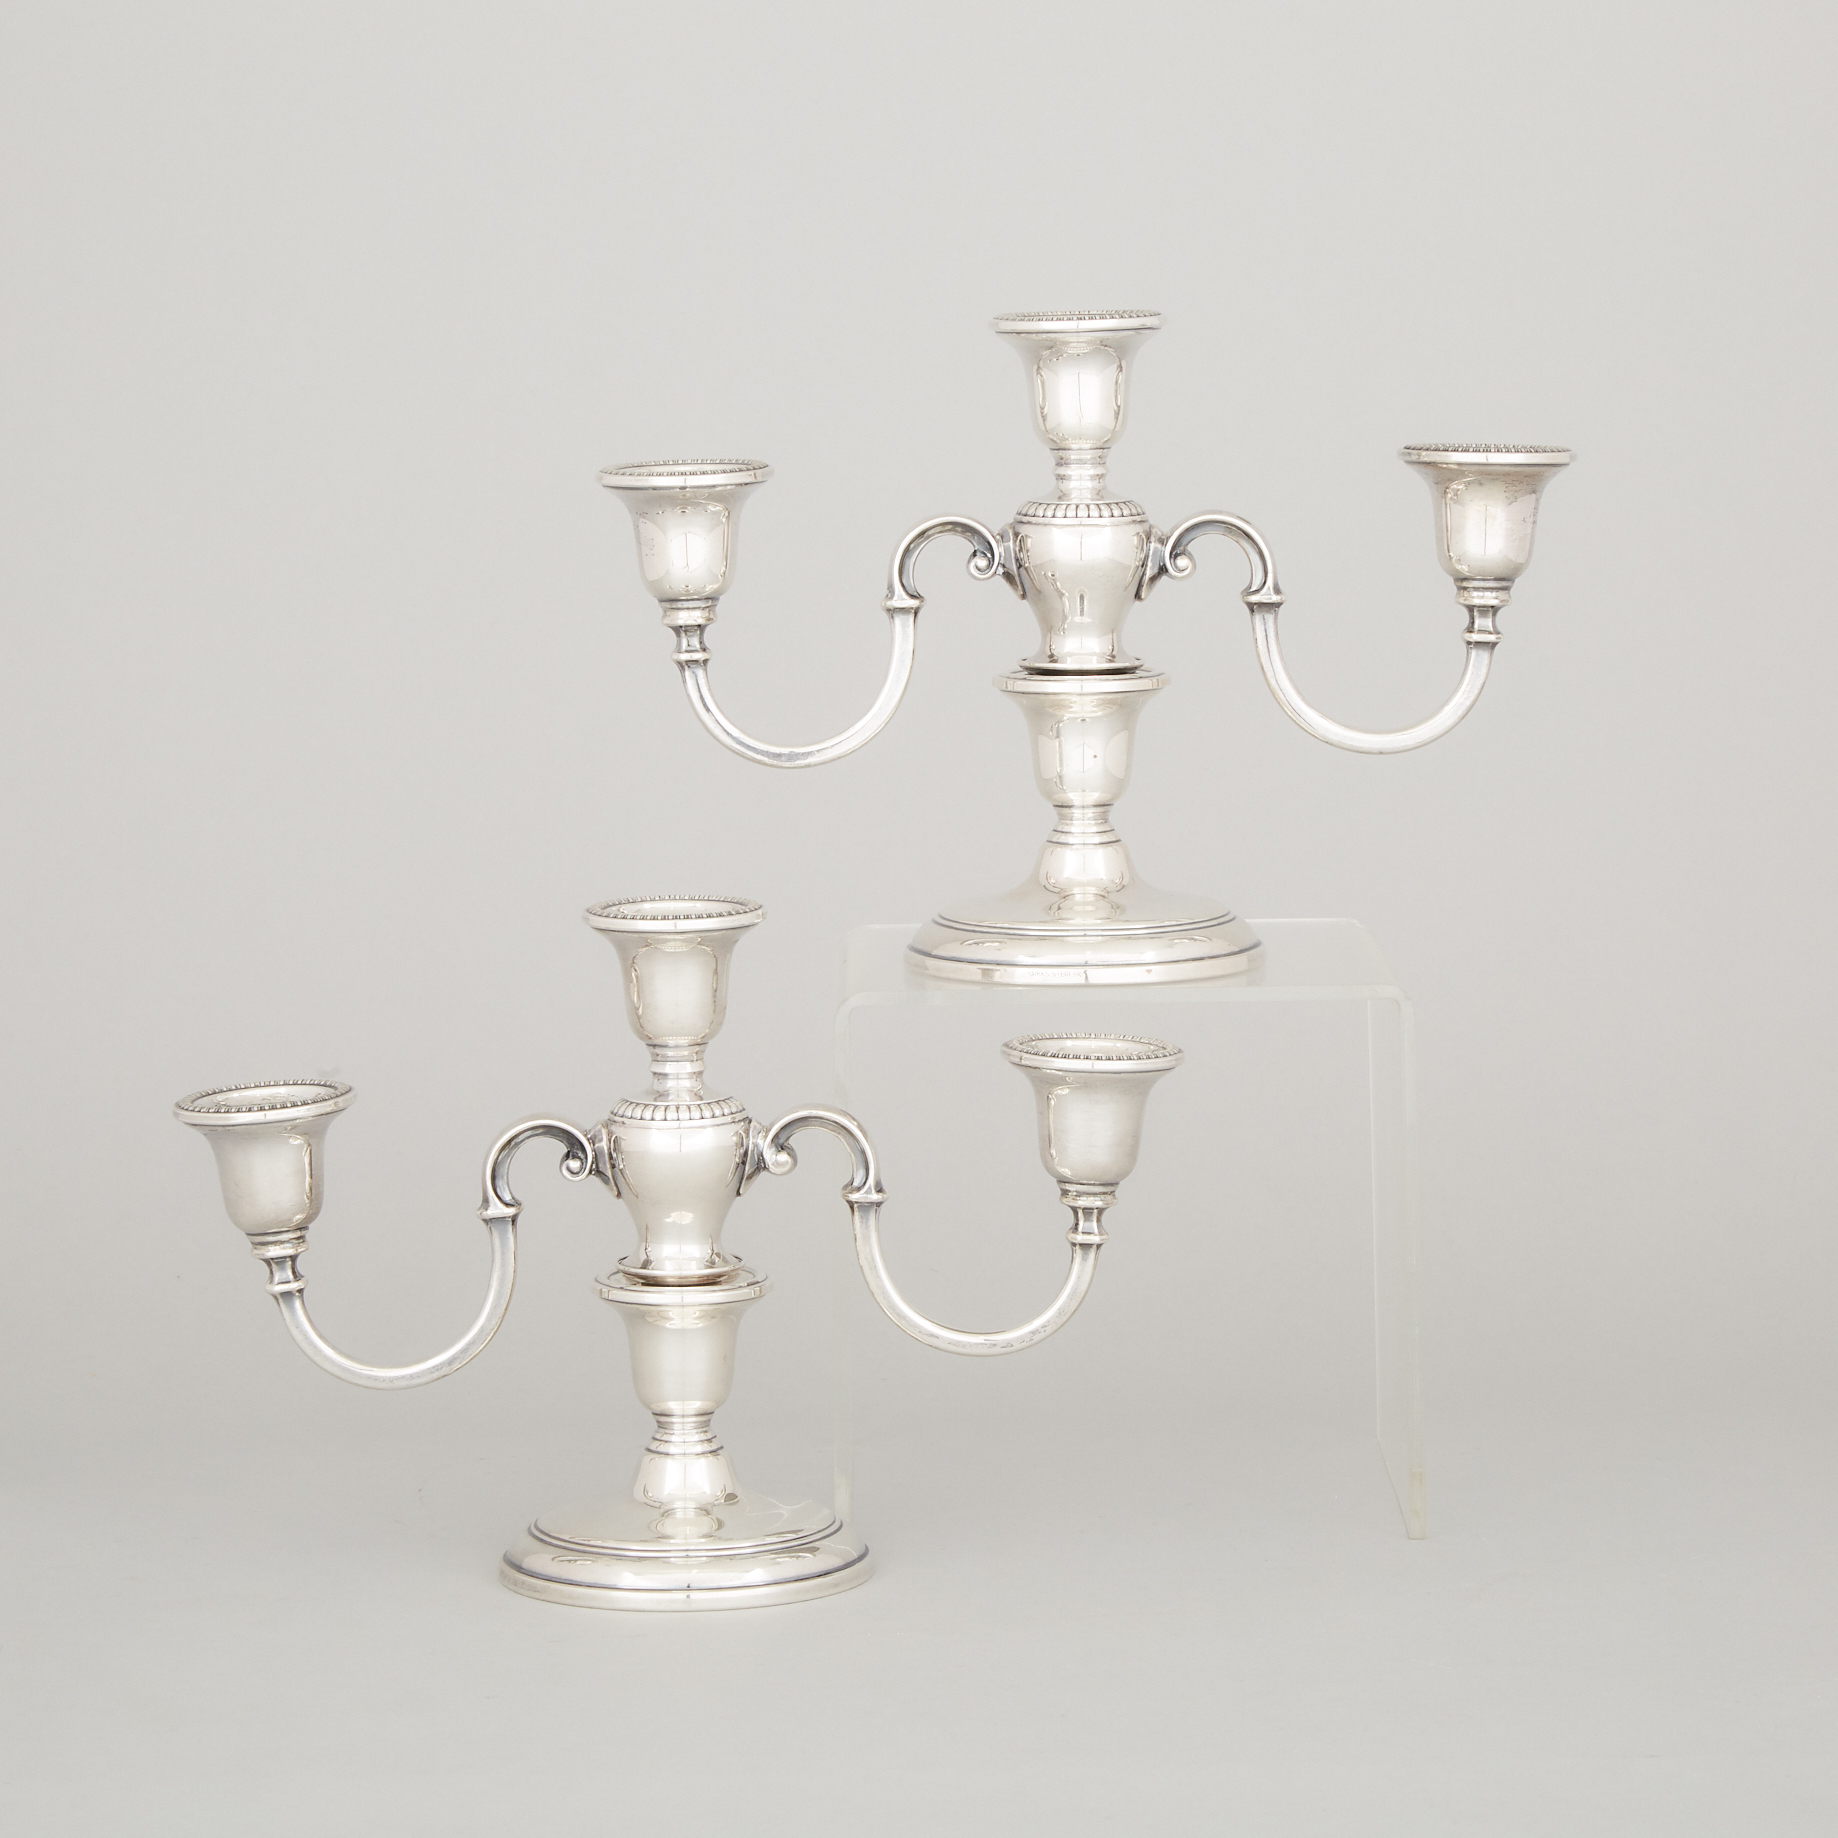 Pair of Canadian Silver Three-Light Candelabra, Henry Birks & Sons, Montreal, Que., 1955